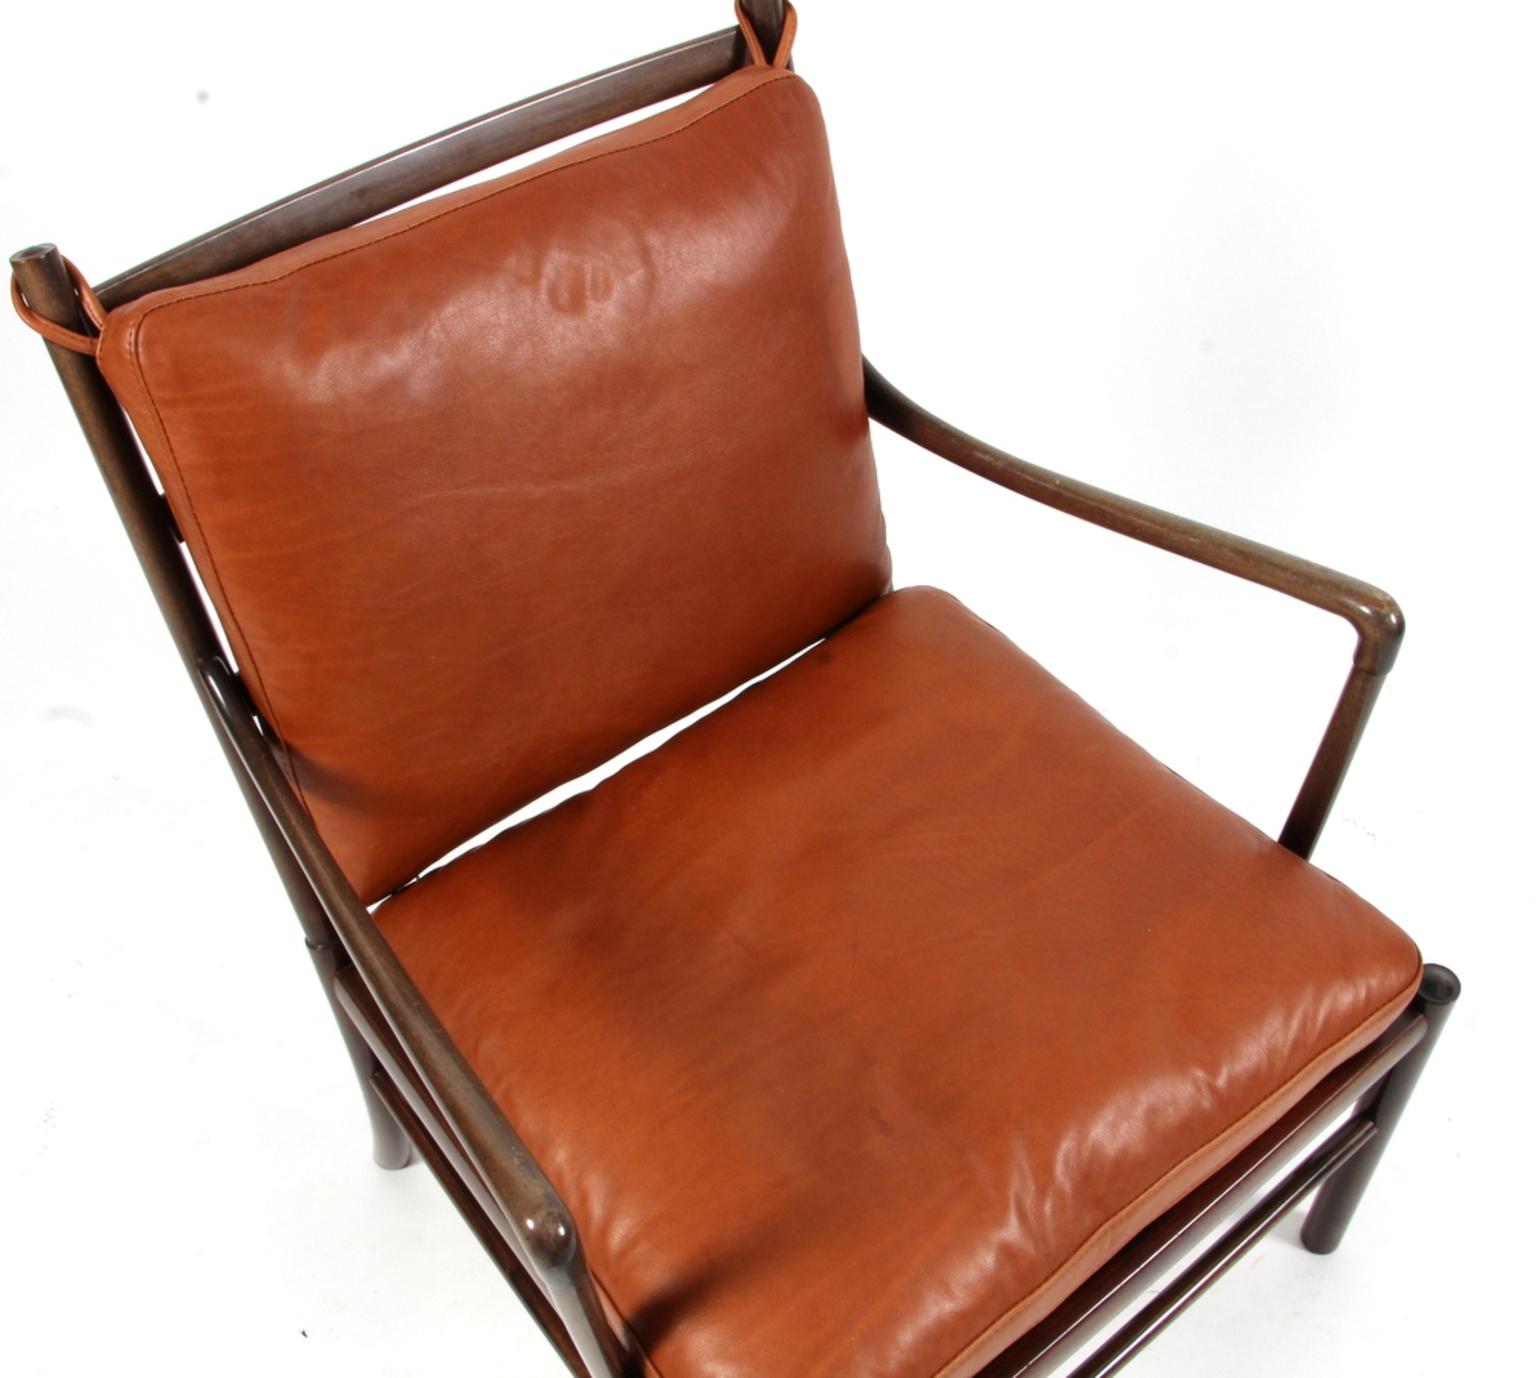 Ole Wanscher lounge chair new upholstered with cognac aniline leather.

Made in mahogany. 

Model PJ 149 colonial chair, made by Poul Jeppesen.